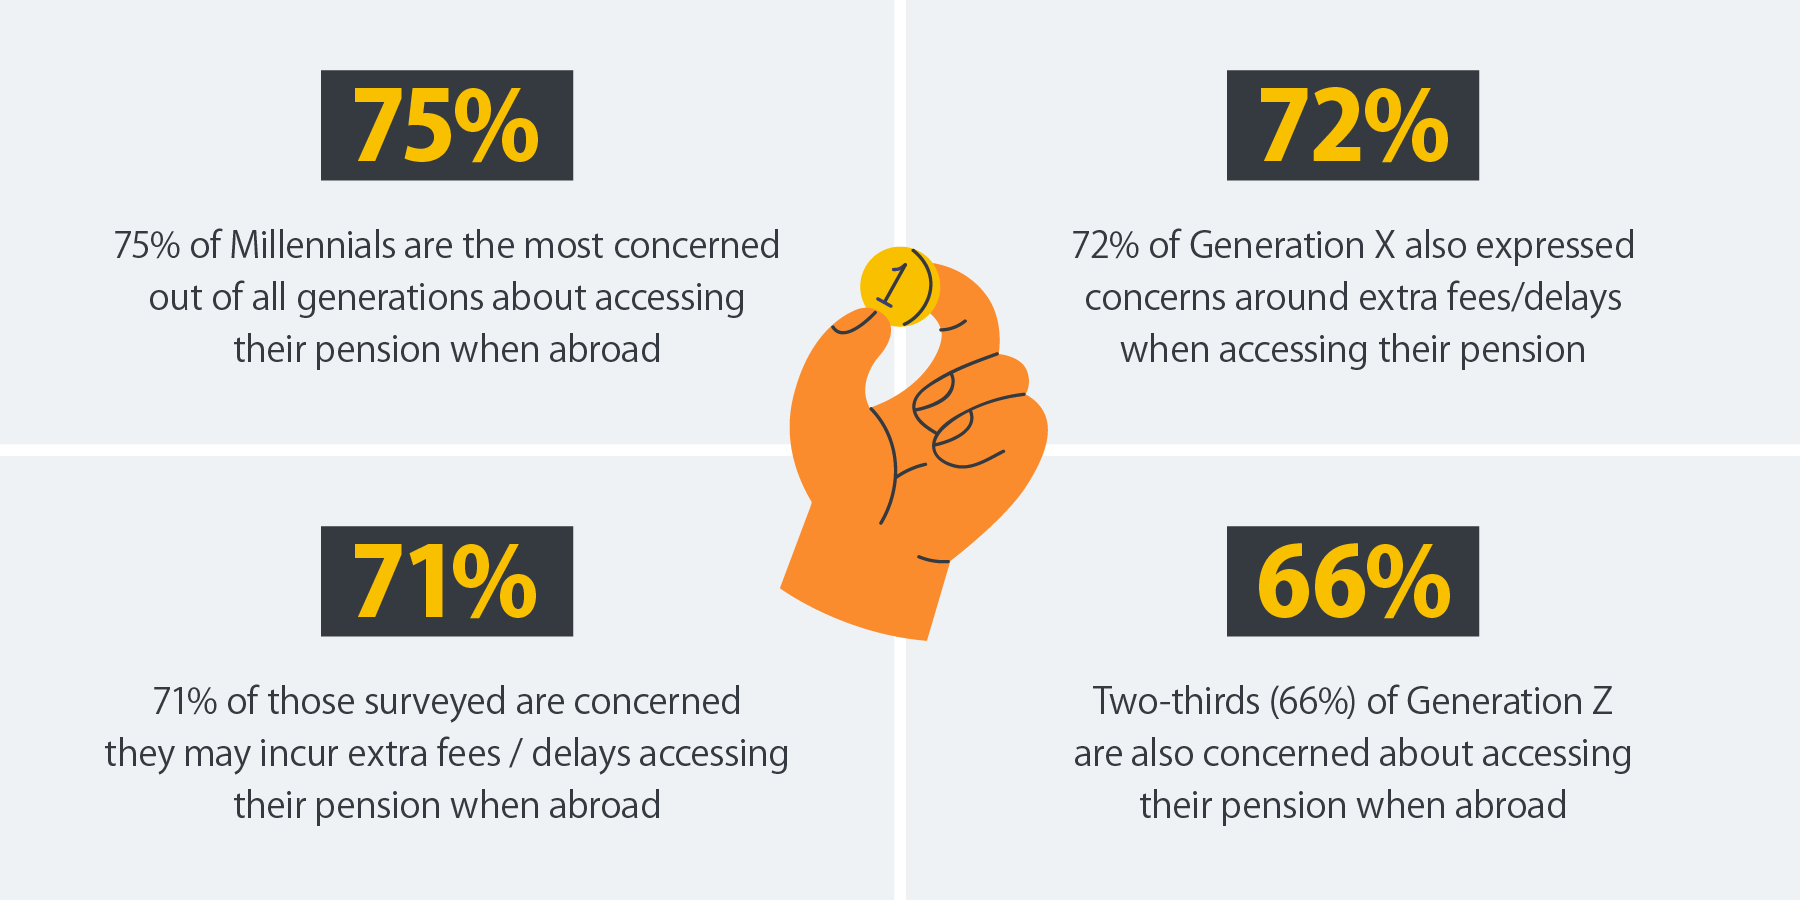 A graphic showing how concerned people are about accesing their pension when abroad